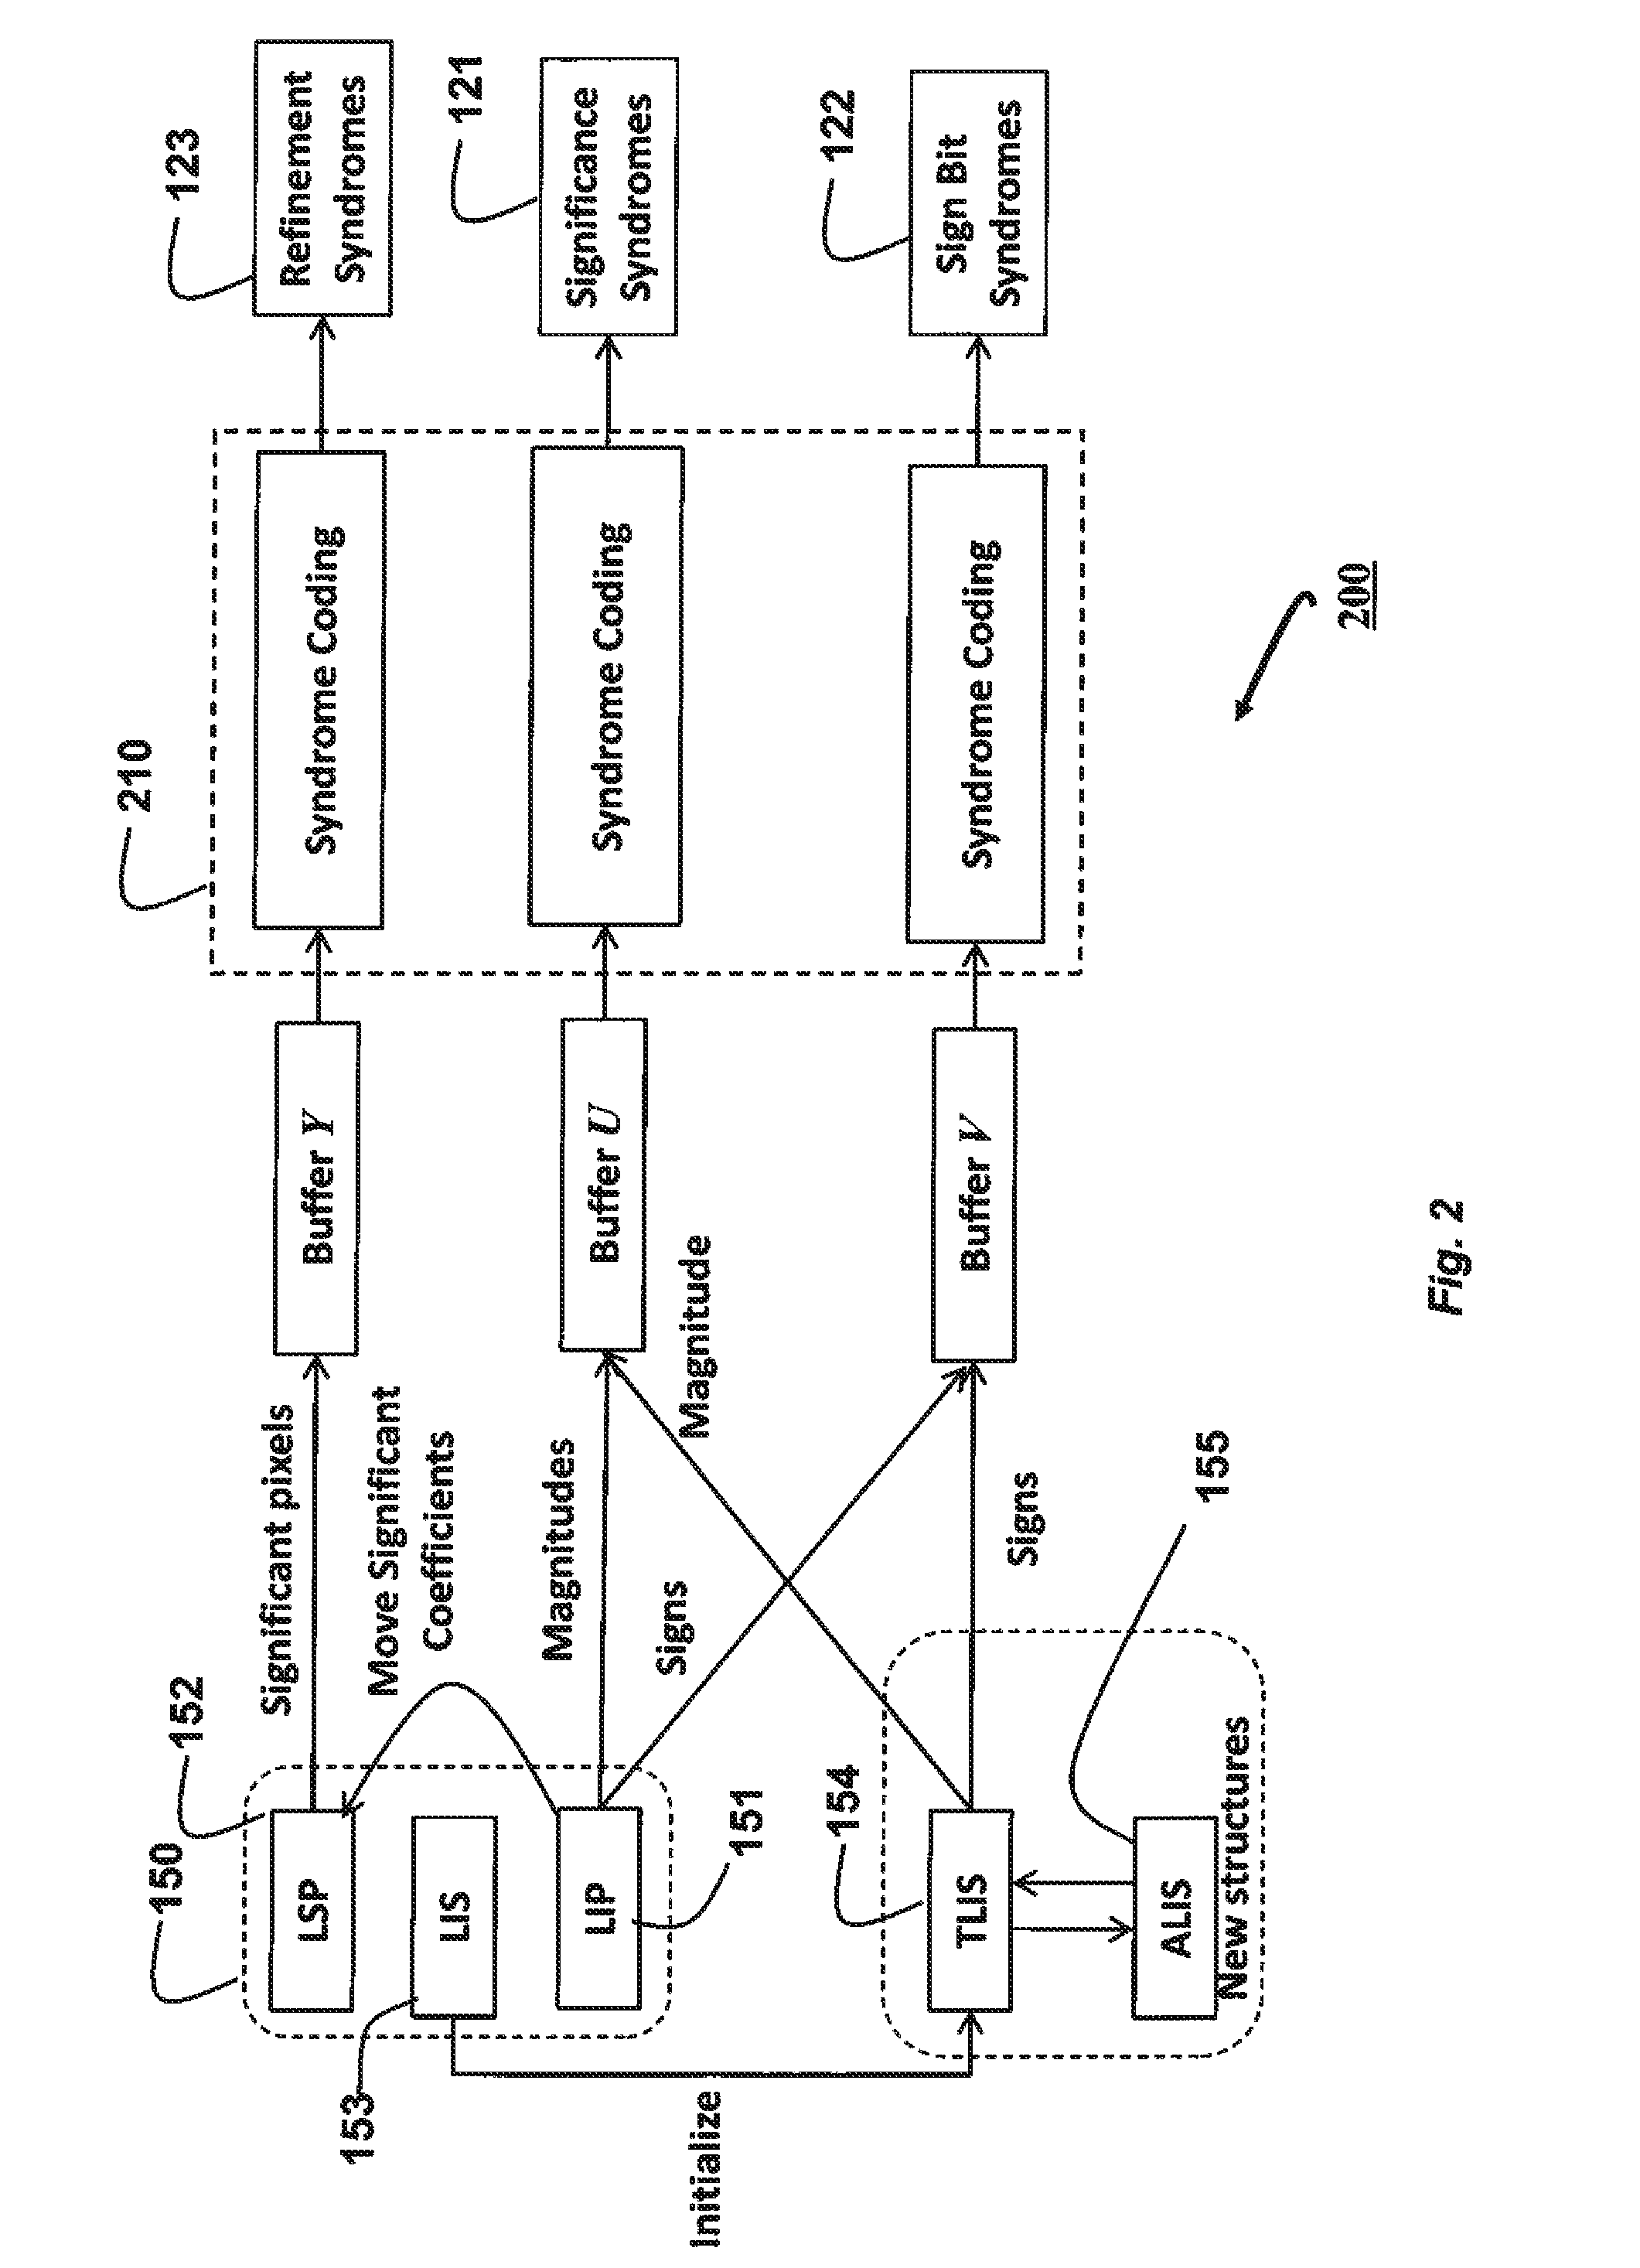 Method for distributed source coding of wavelet coefficients in zerotrees